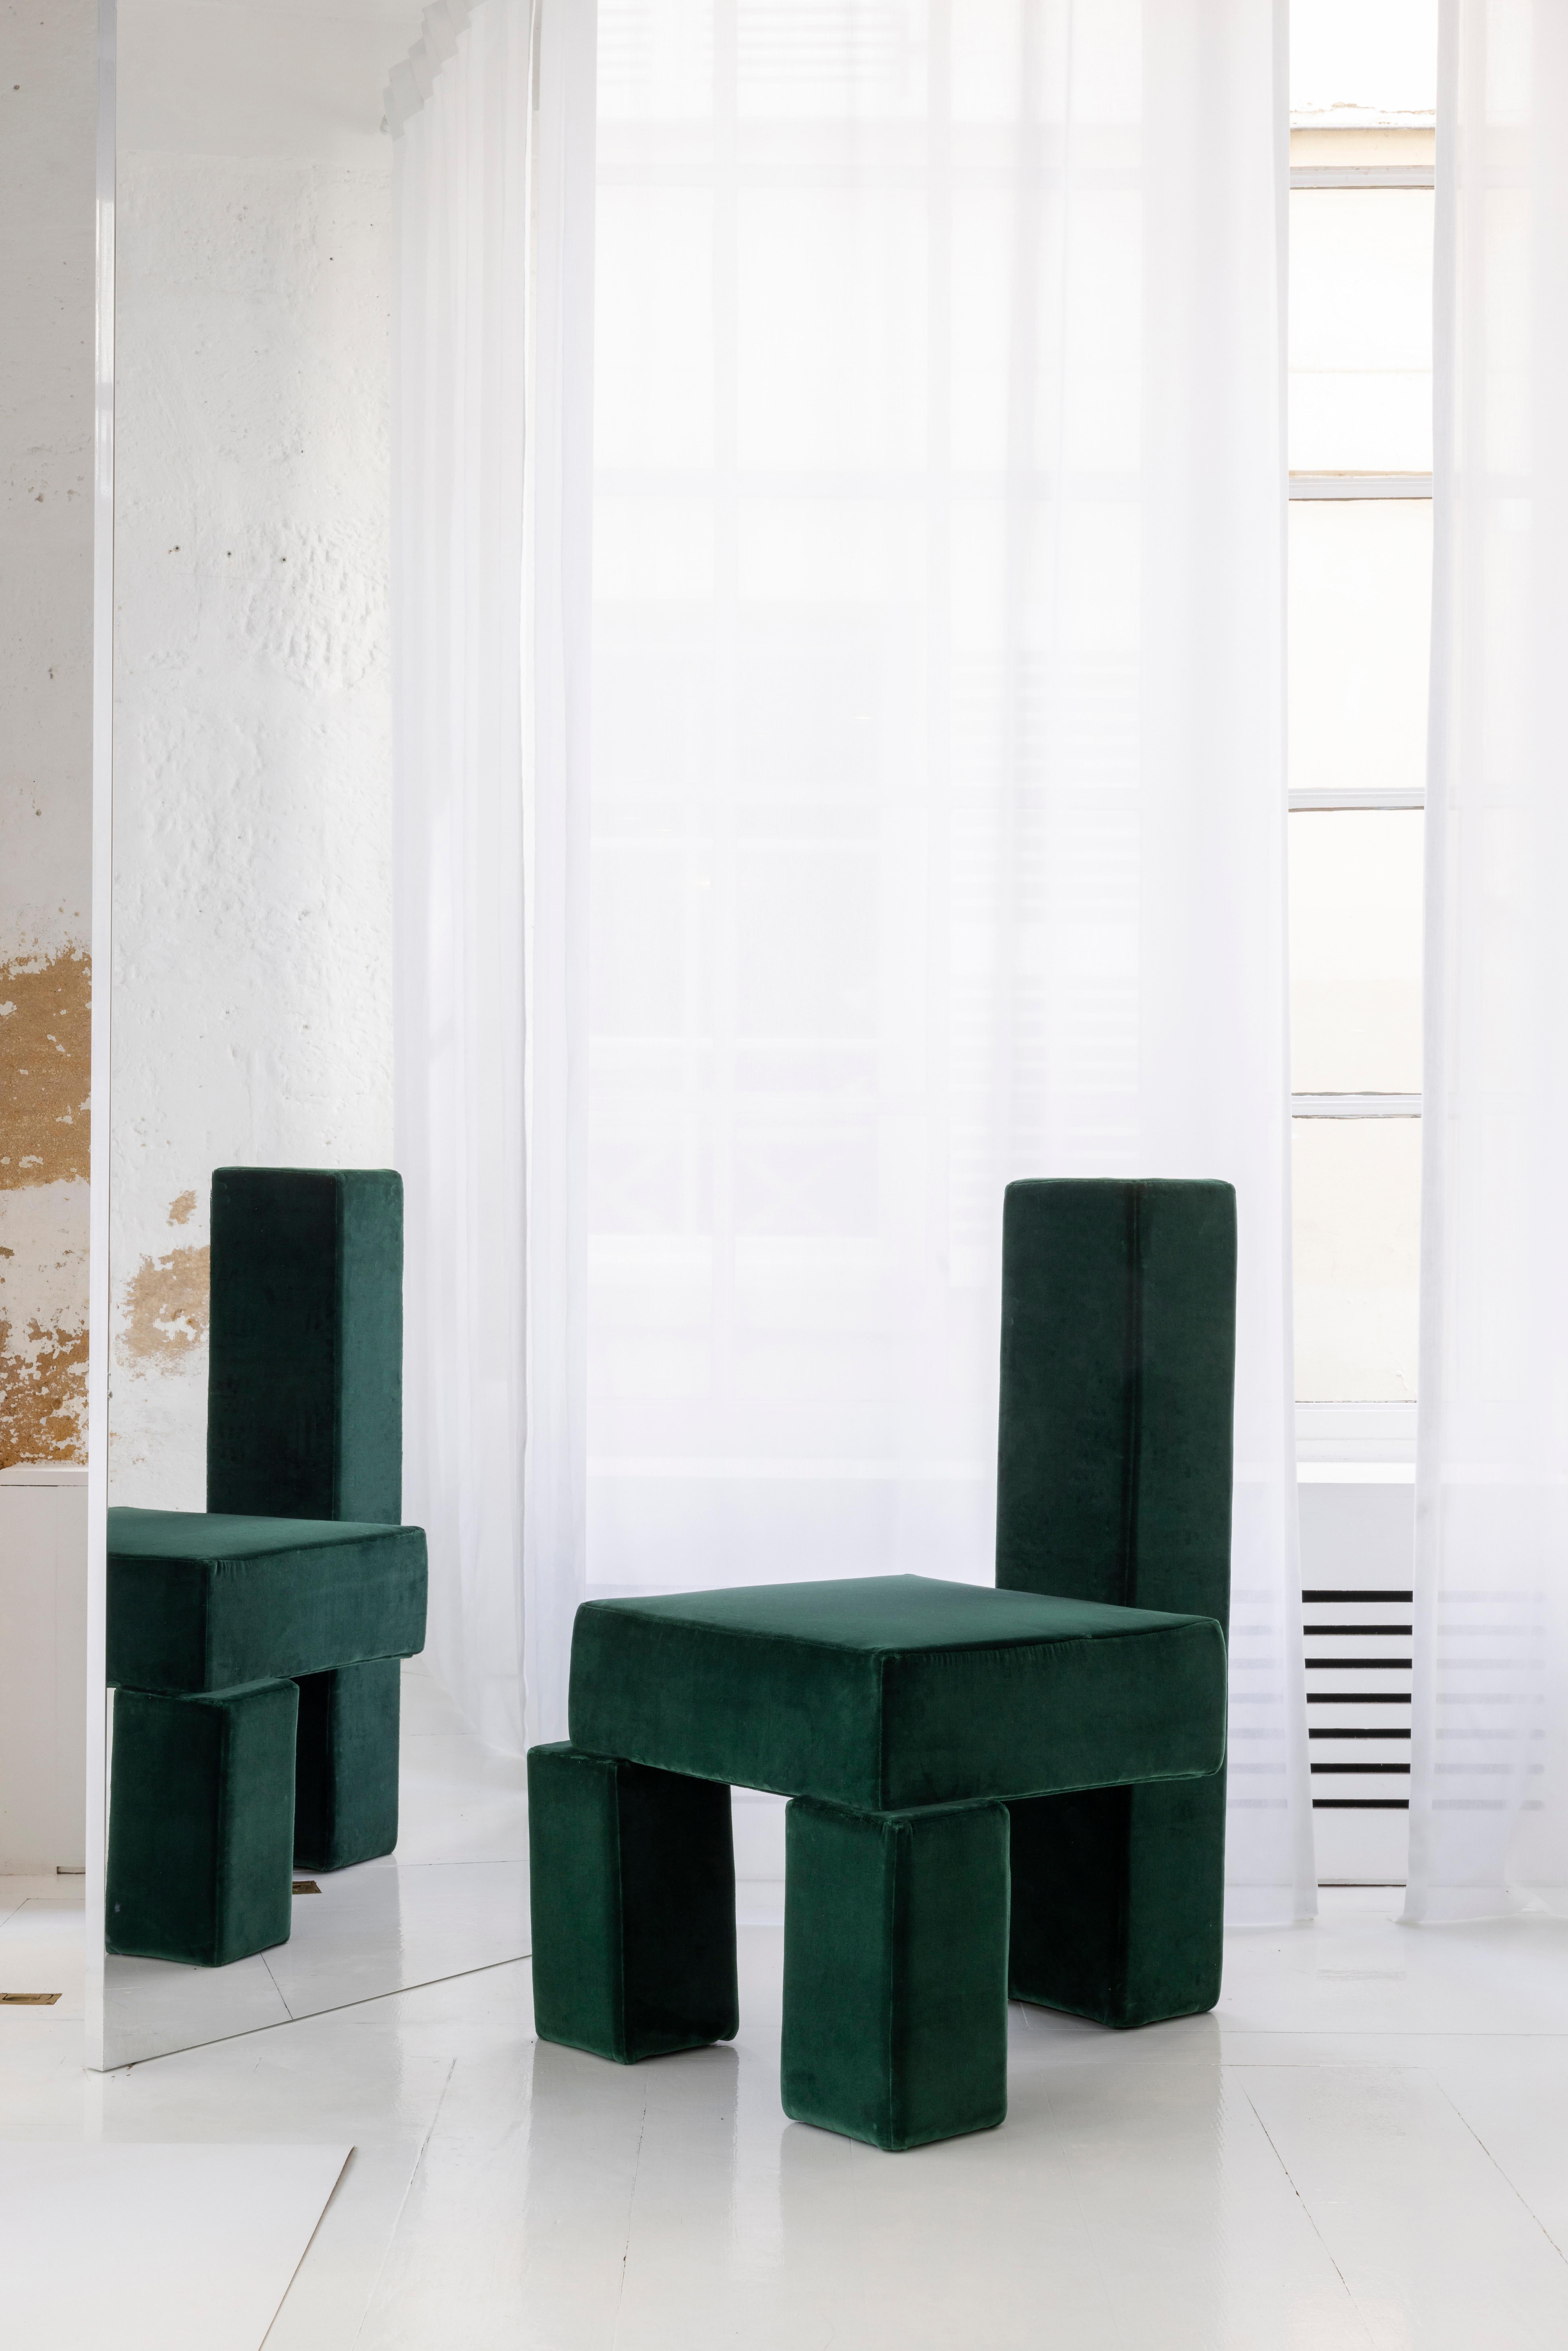 Licitra chair by Pietro Franceschini
Dimensions: W 62 x D 71 x H 95 cm
Materials: Velvet (by Métaphores).

Somebody once said that simplicity is the essence of happiness. So I dedicated this work to my friend Caterina Licitra.
Licitra Chair